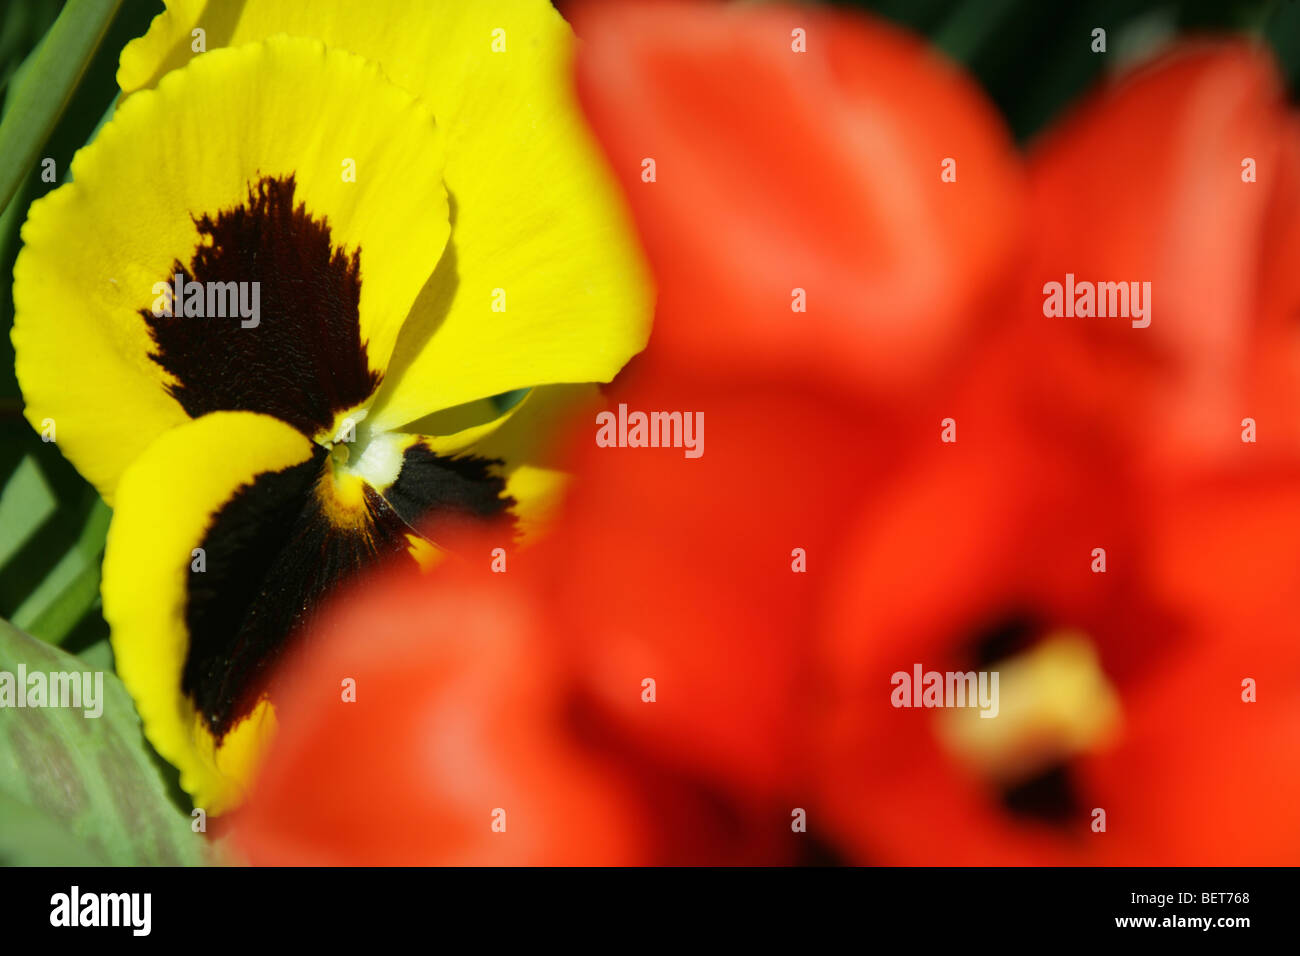 Yellow and black Pansy flower with red and black tulip out of focus in the foreground. Stock Photo